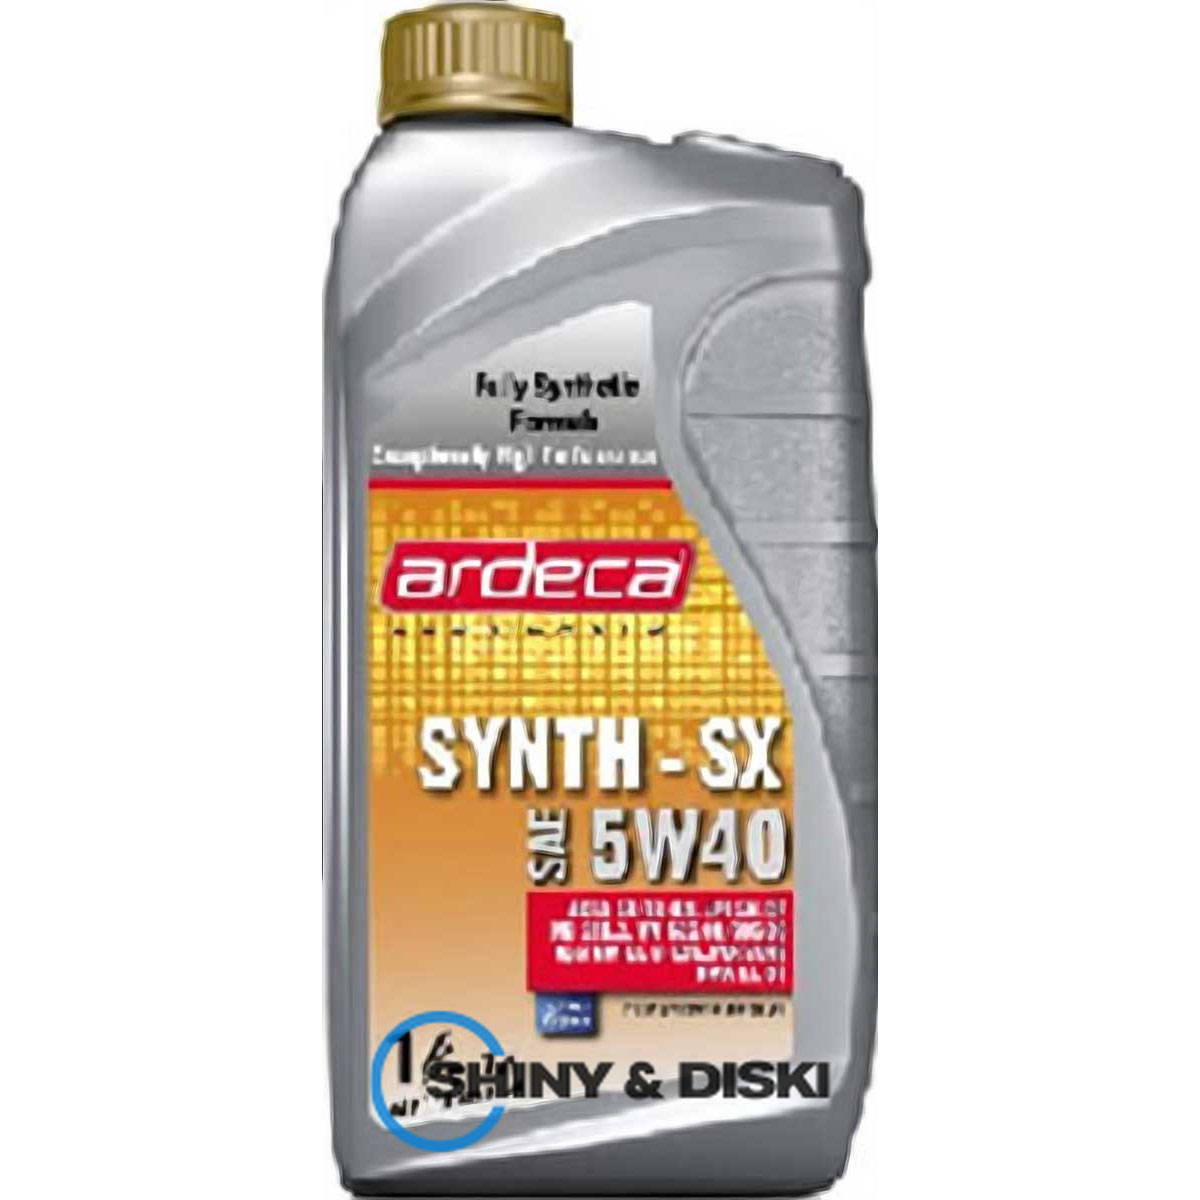 ardeca synth-sx